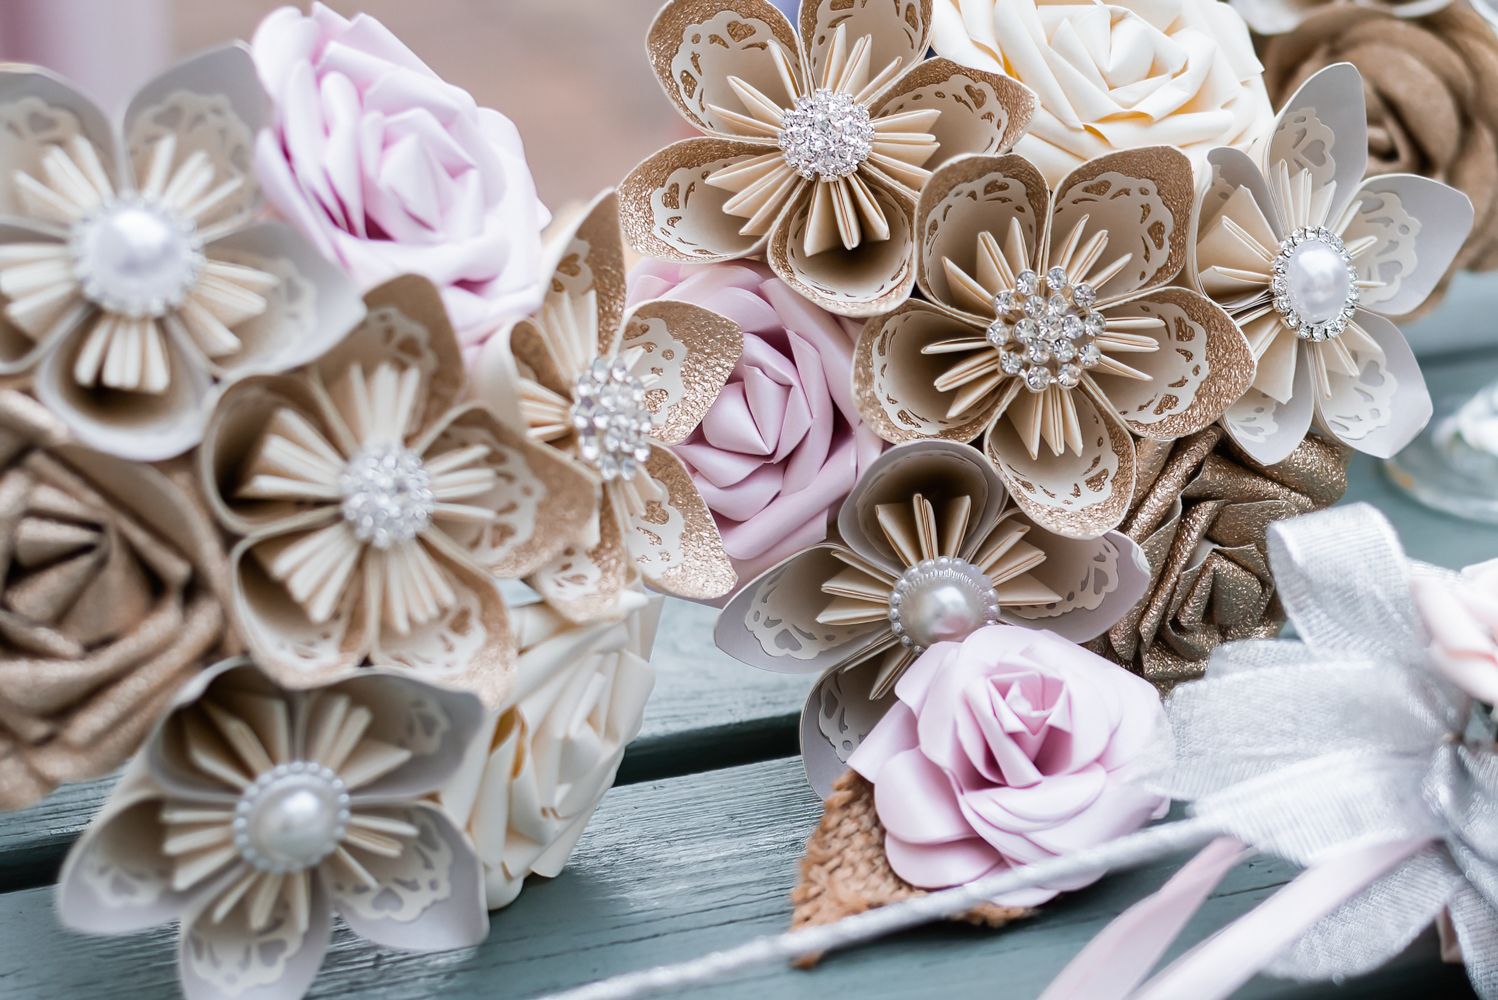 The bouquets are made of paper flowers and feature cream, brown and pink handmade flowers